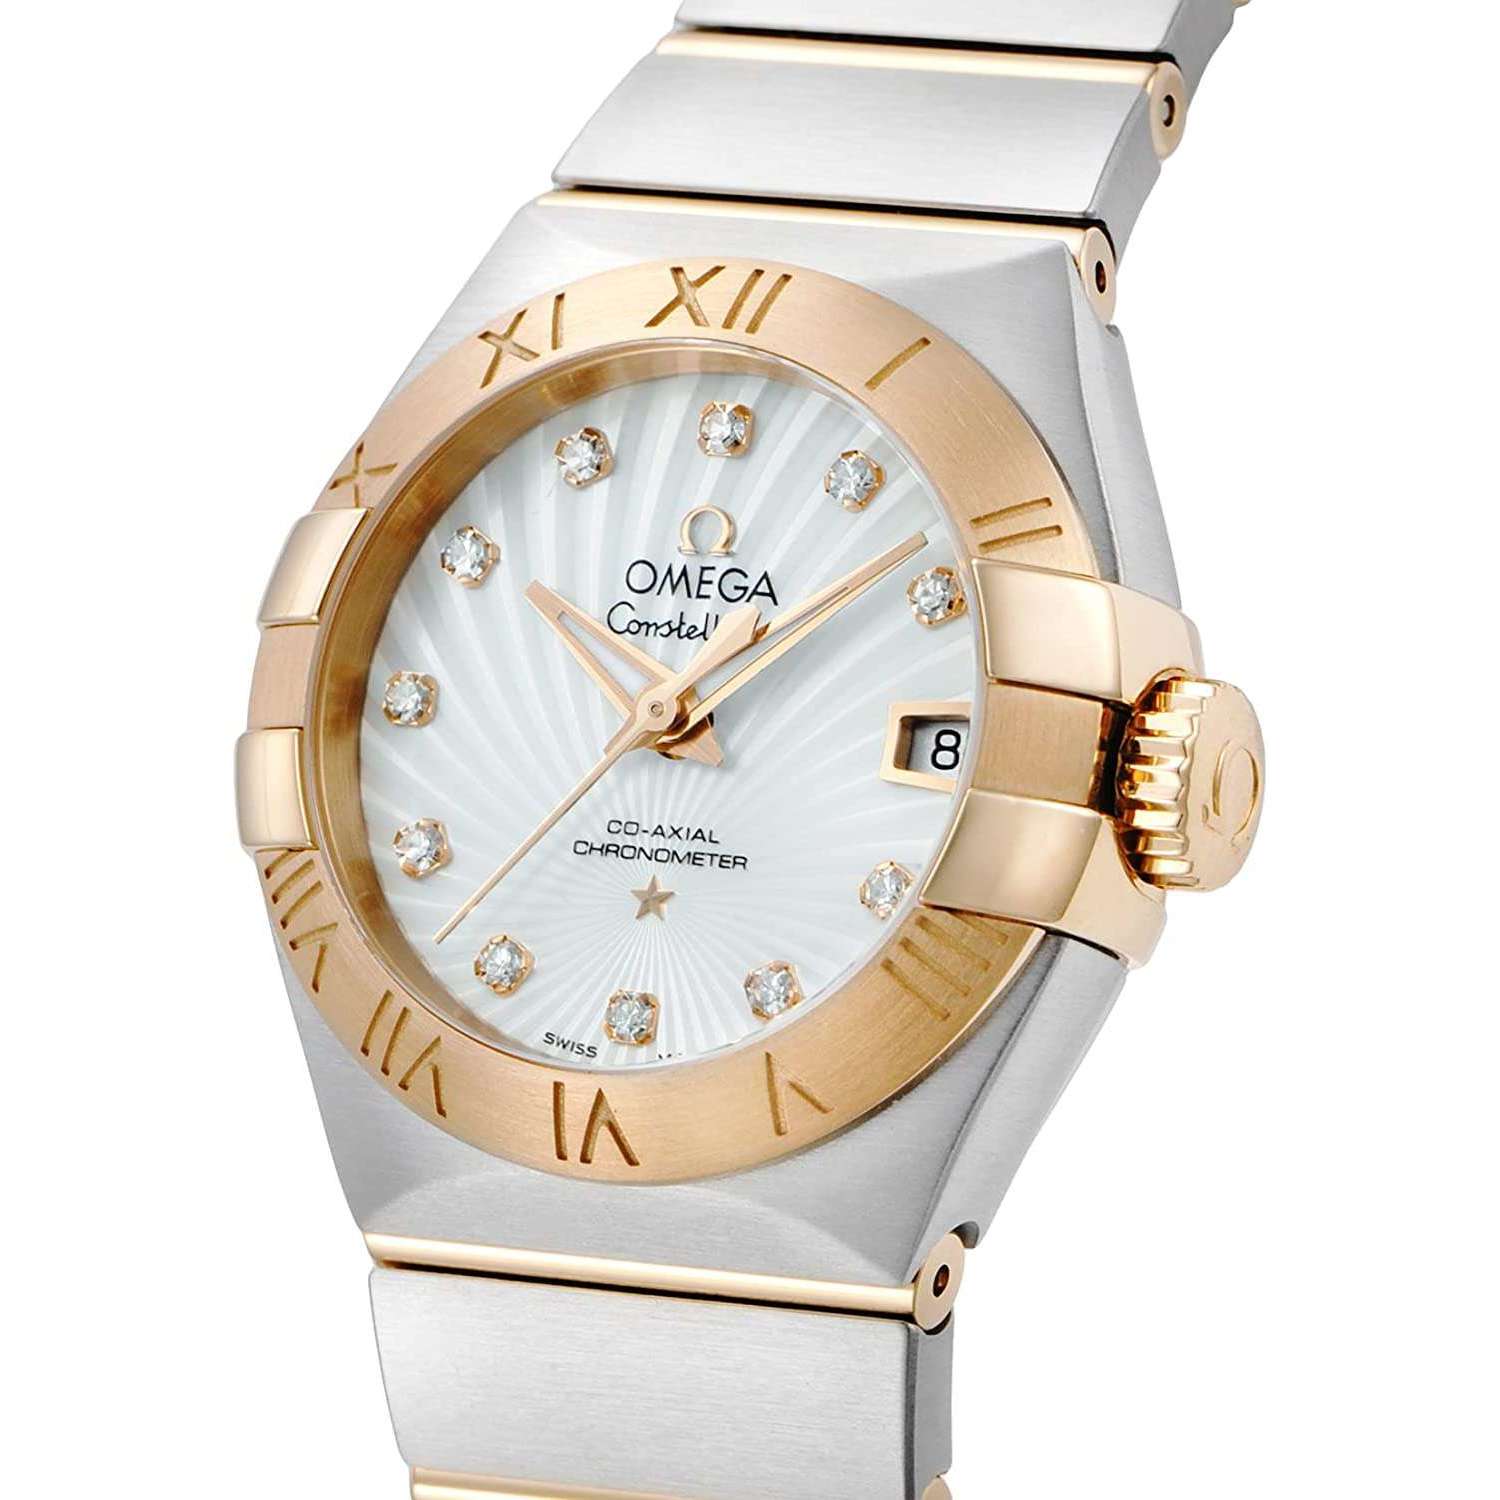 ROOK JAPAN:OMEGA CONSTELLATION CO-AXIAL CHRONOMETER 27 MM WOMEN WATCH 123.20.27.20.55.001,Luxury Watch,Omega